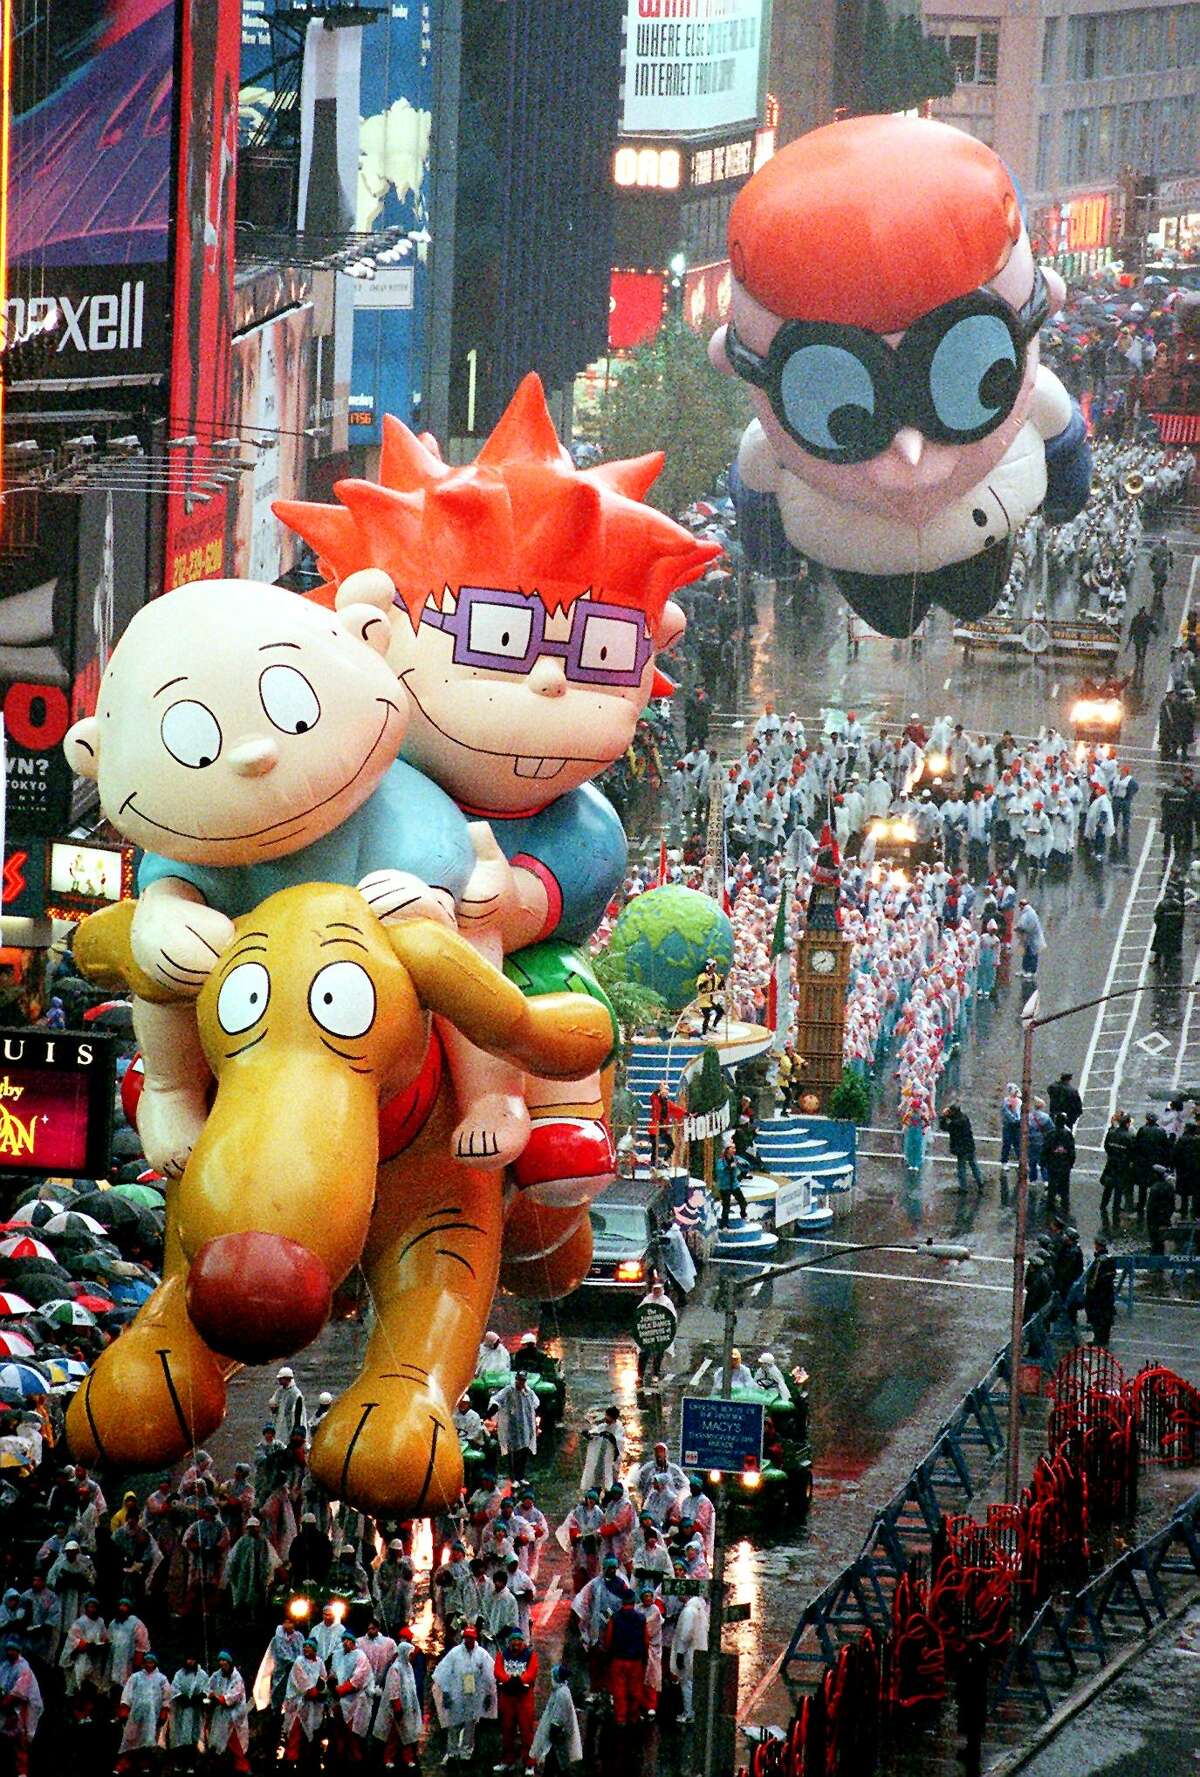 A look back at Macy's Thanksgiving Day Parade balloons through the ages